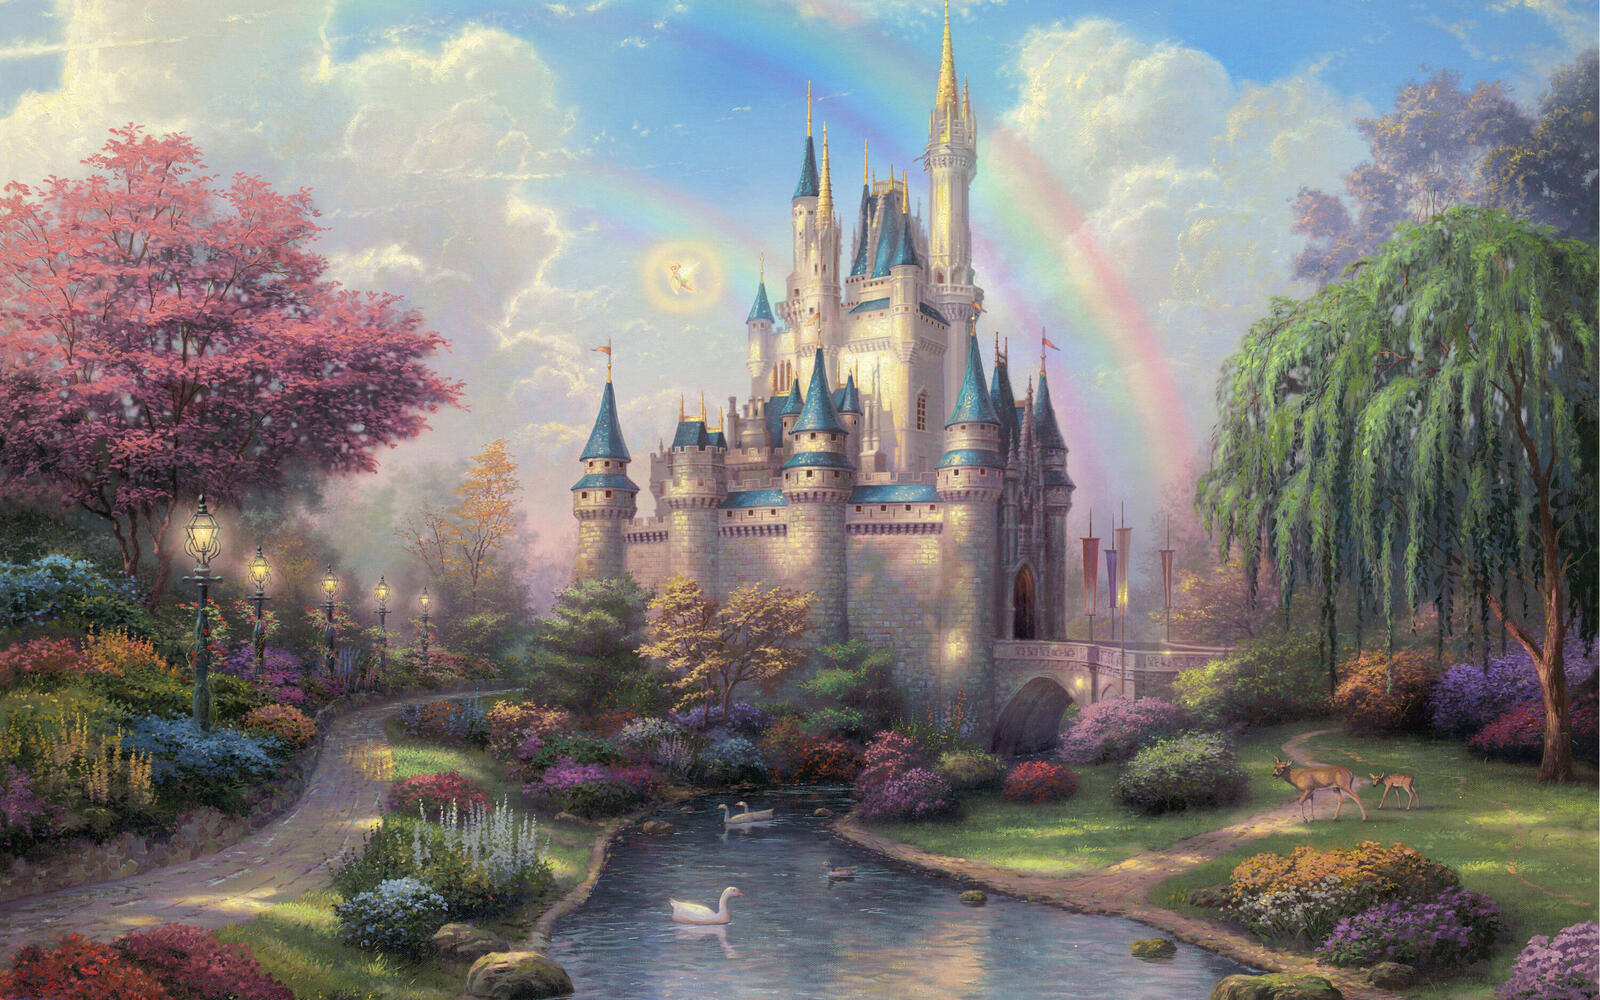 Wallpapers painting new day at the cinderella castle thomas kinkade on the desktop